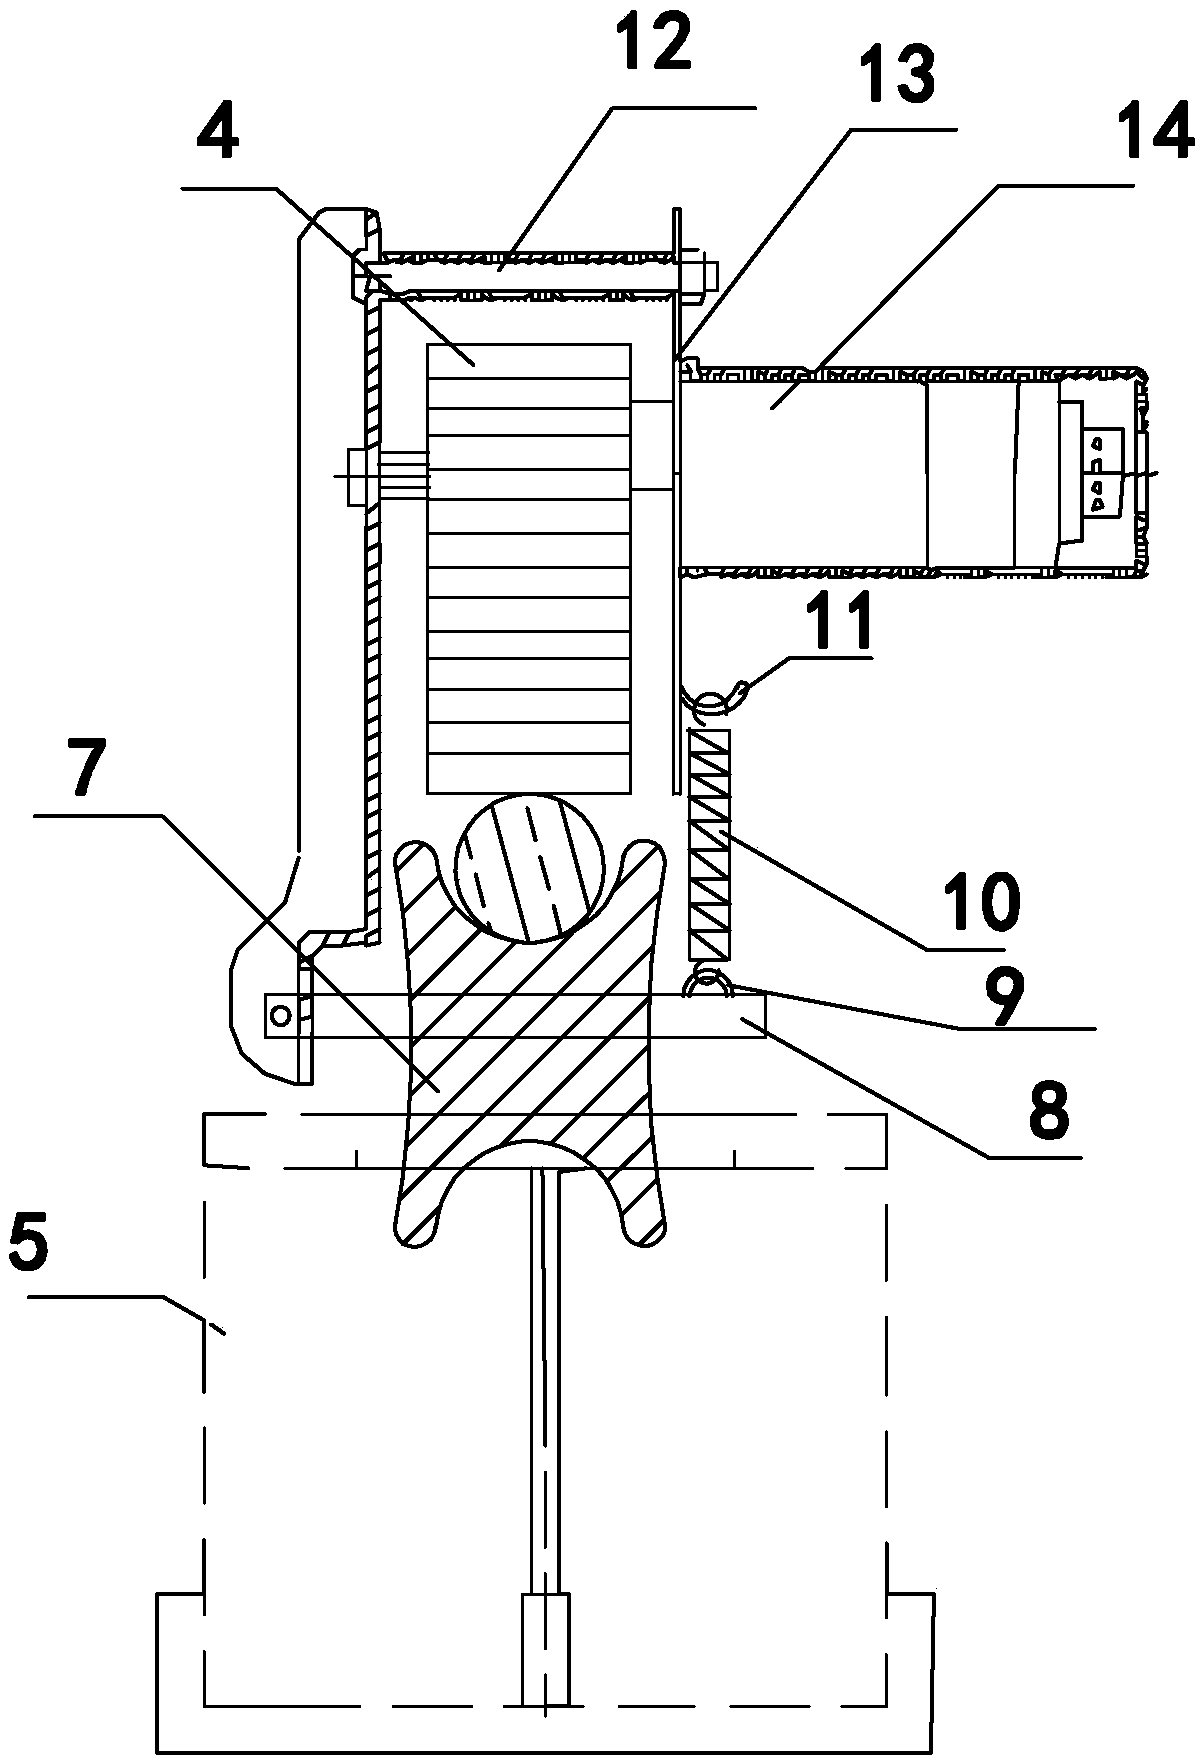 Automatic detection system and method for sag of power transmission line